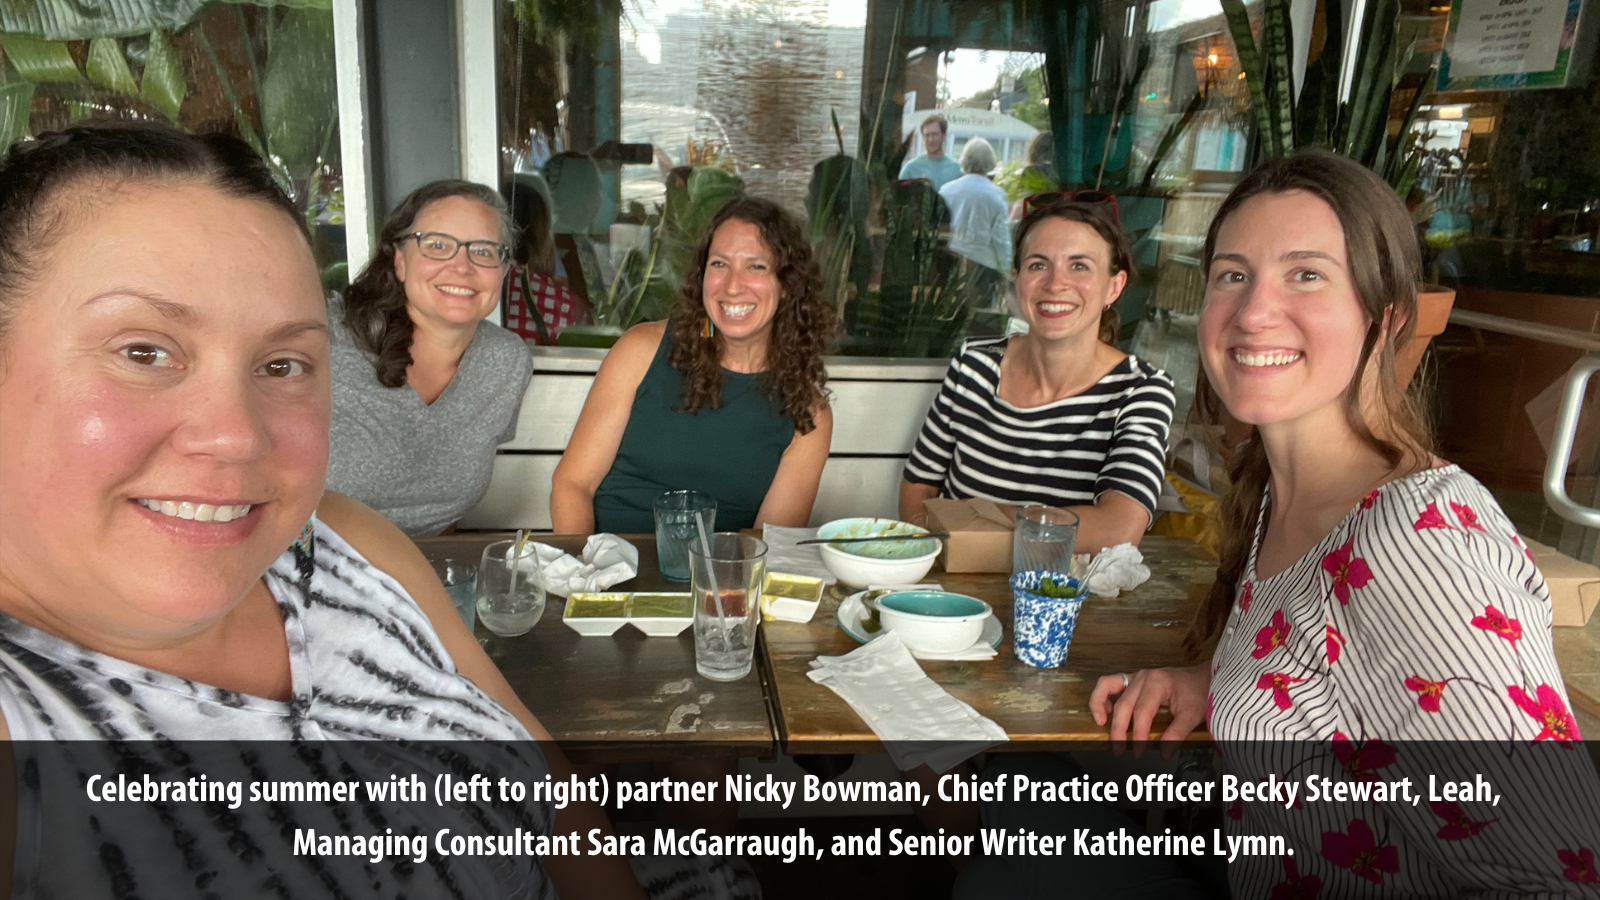 Celebrating summer with (left to right) partner Nicky Bowman, Chief Practice Officer Becky Stewart, Leah, Managing Consultant Sara McGarraugh, and Senior Writer Katherine Lymn.